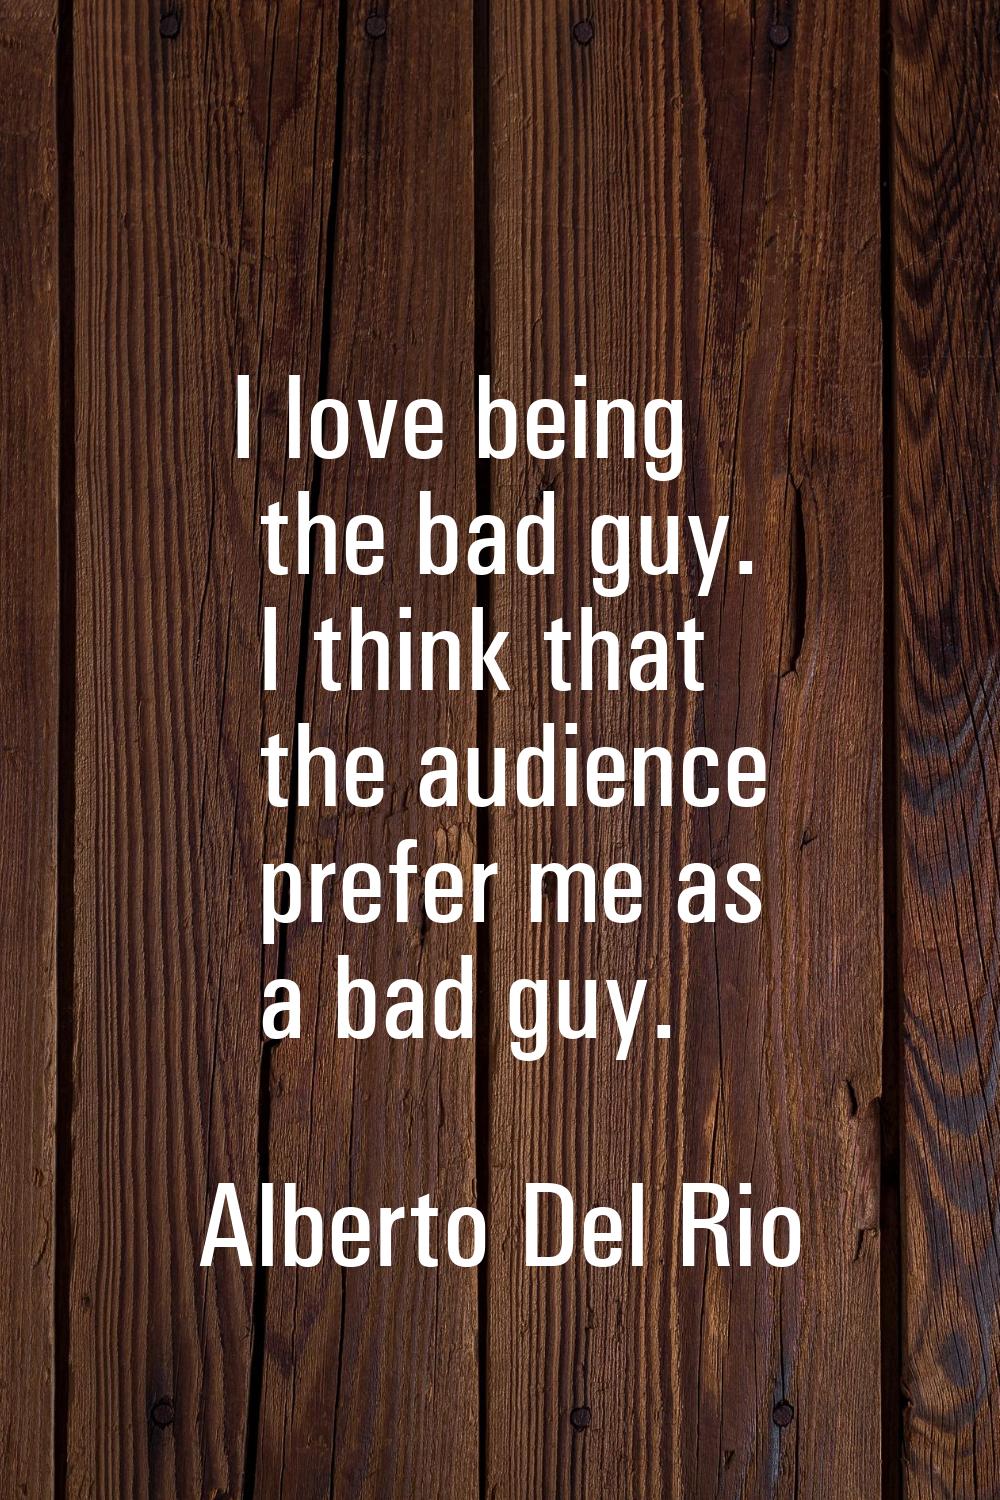 I love being the bad guy. I think that the audience prefer me as a bad guy.